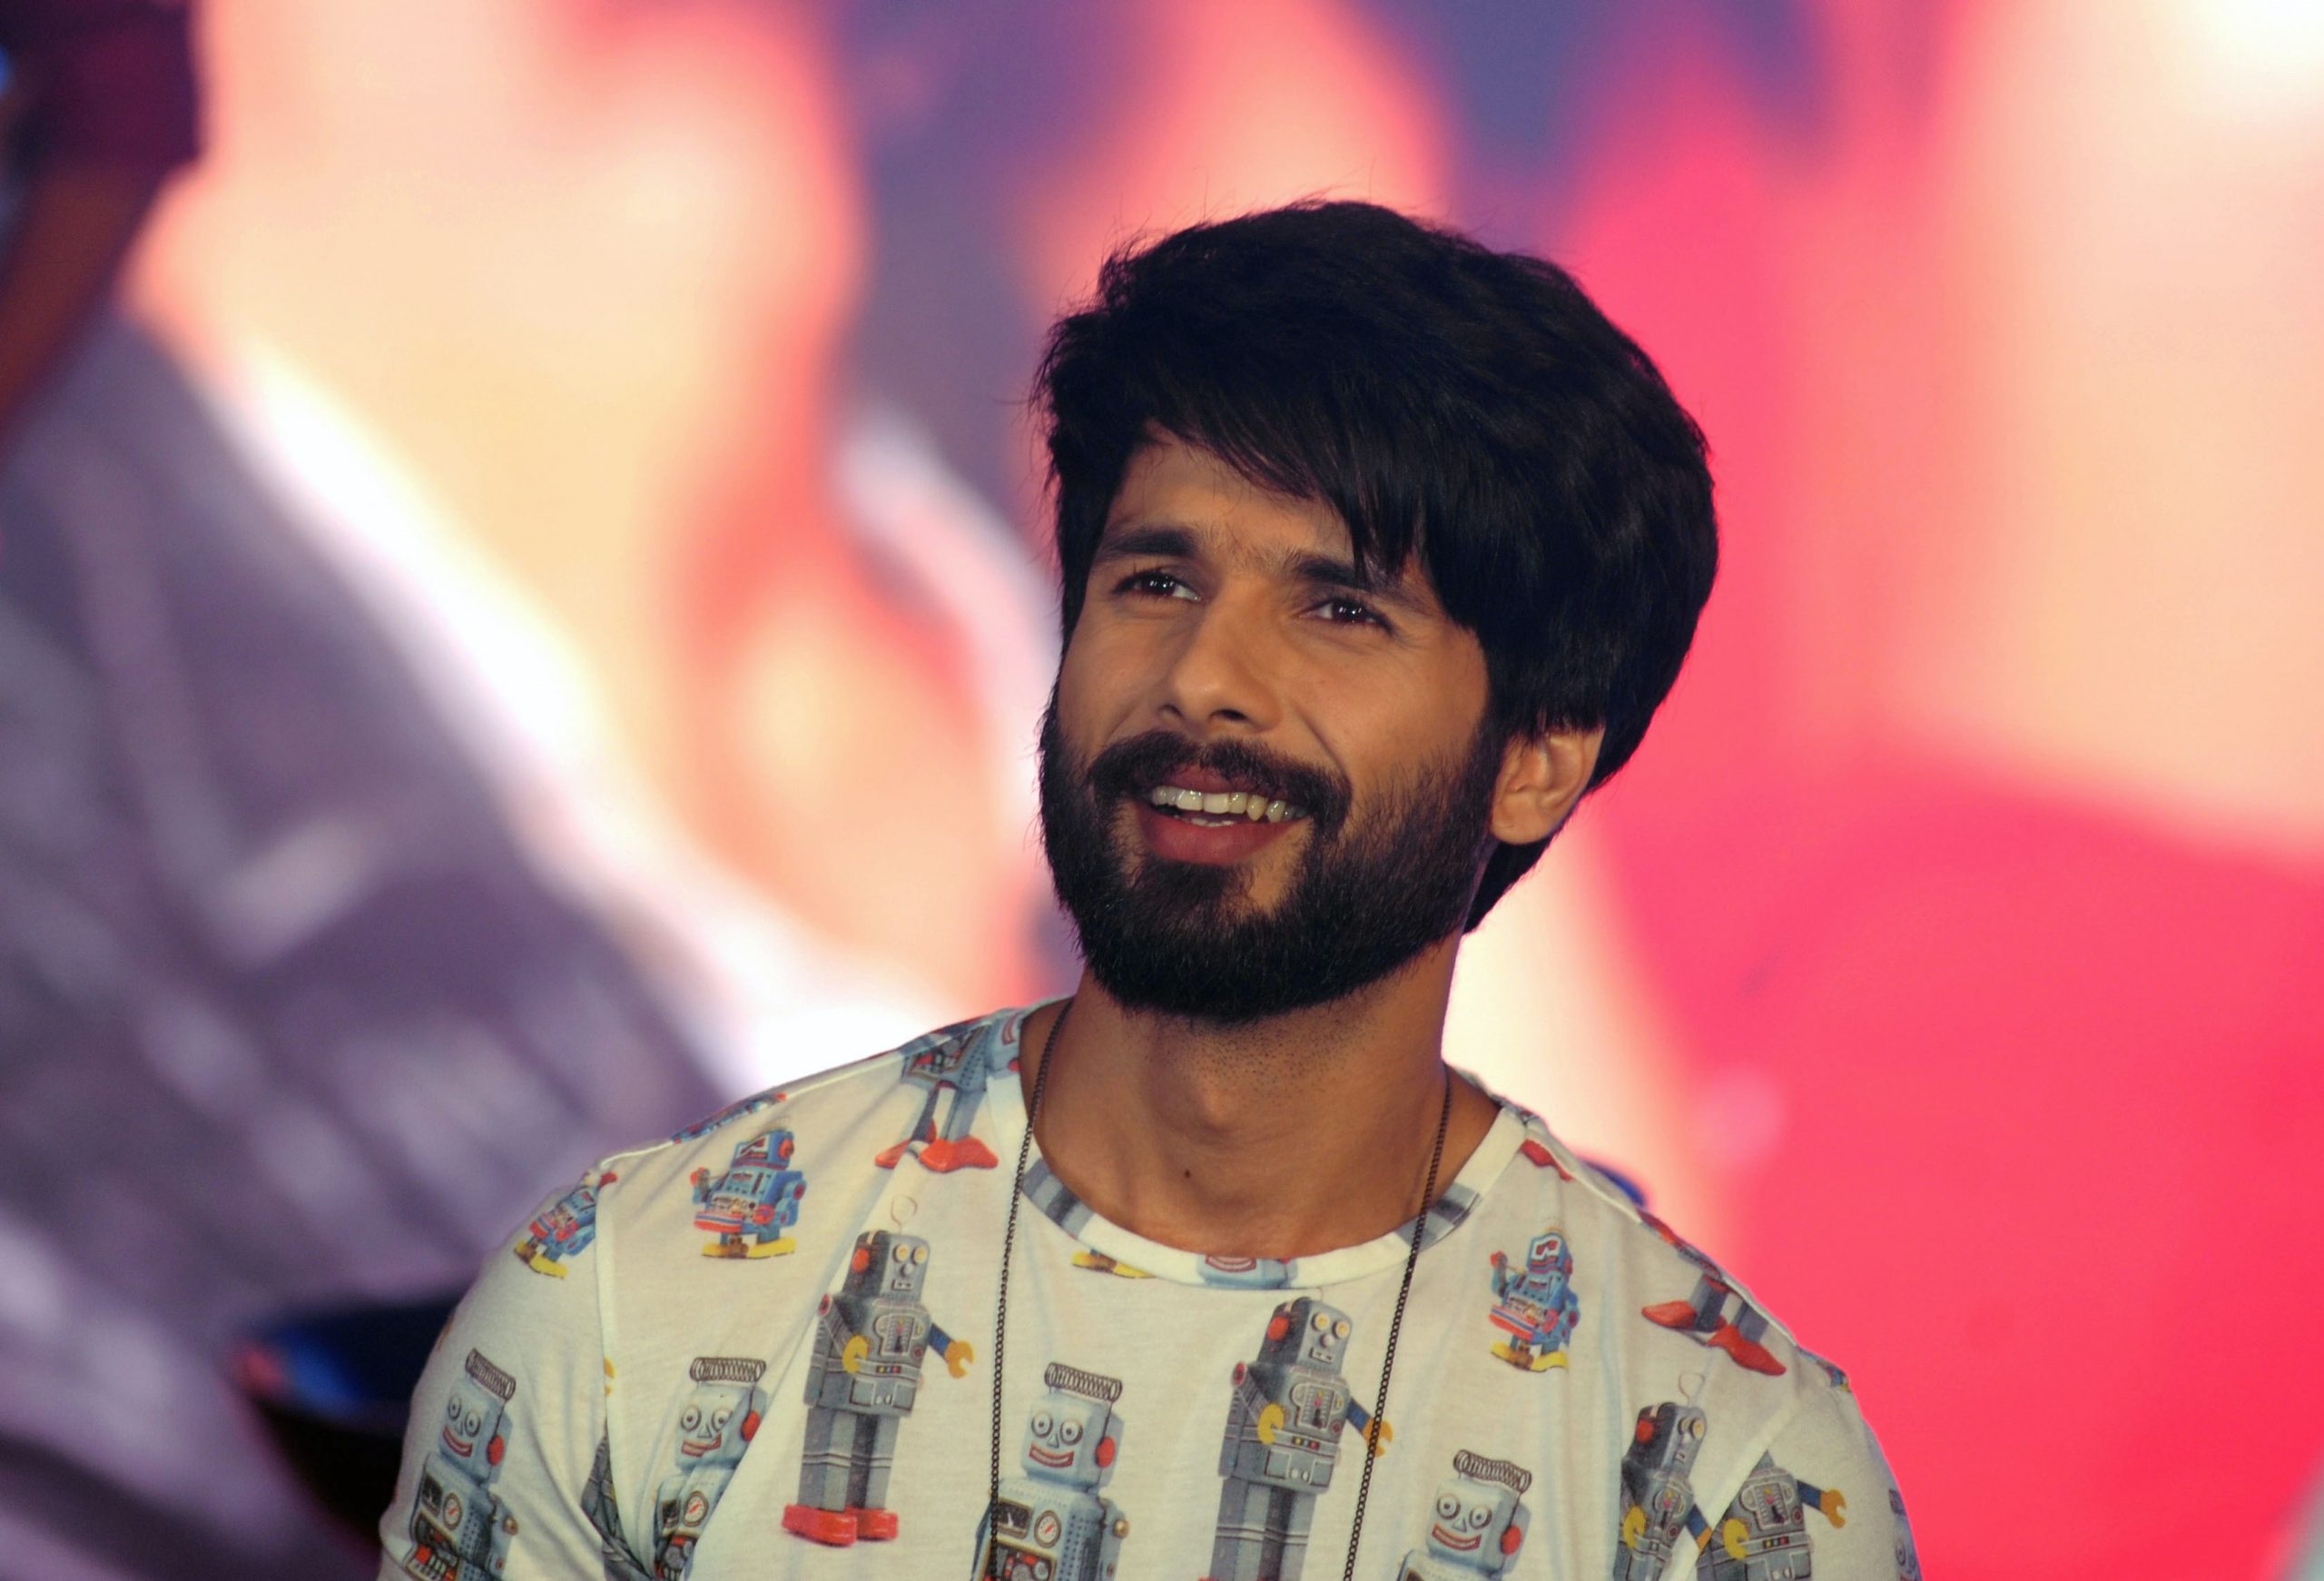 Shahid Kapoor to go bald for film role